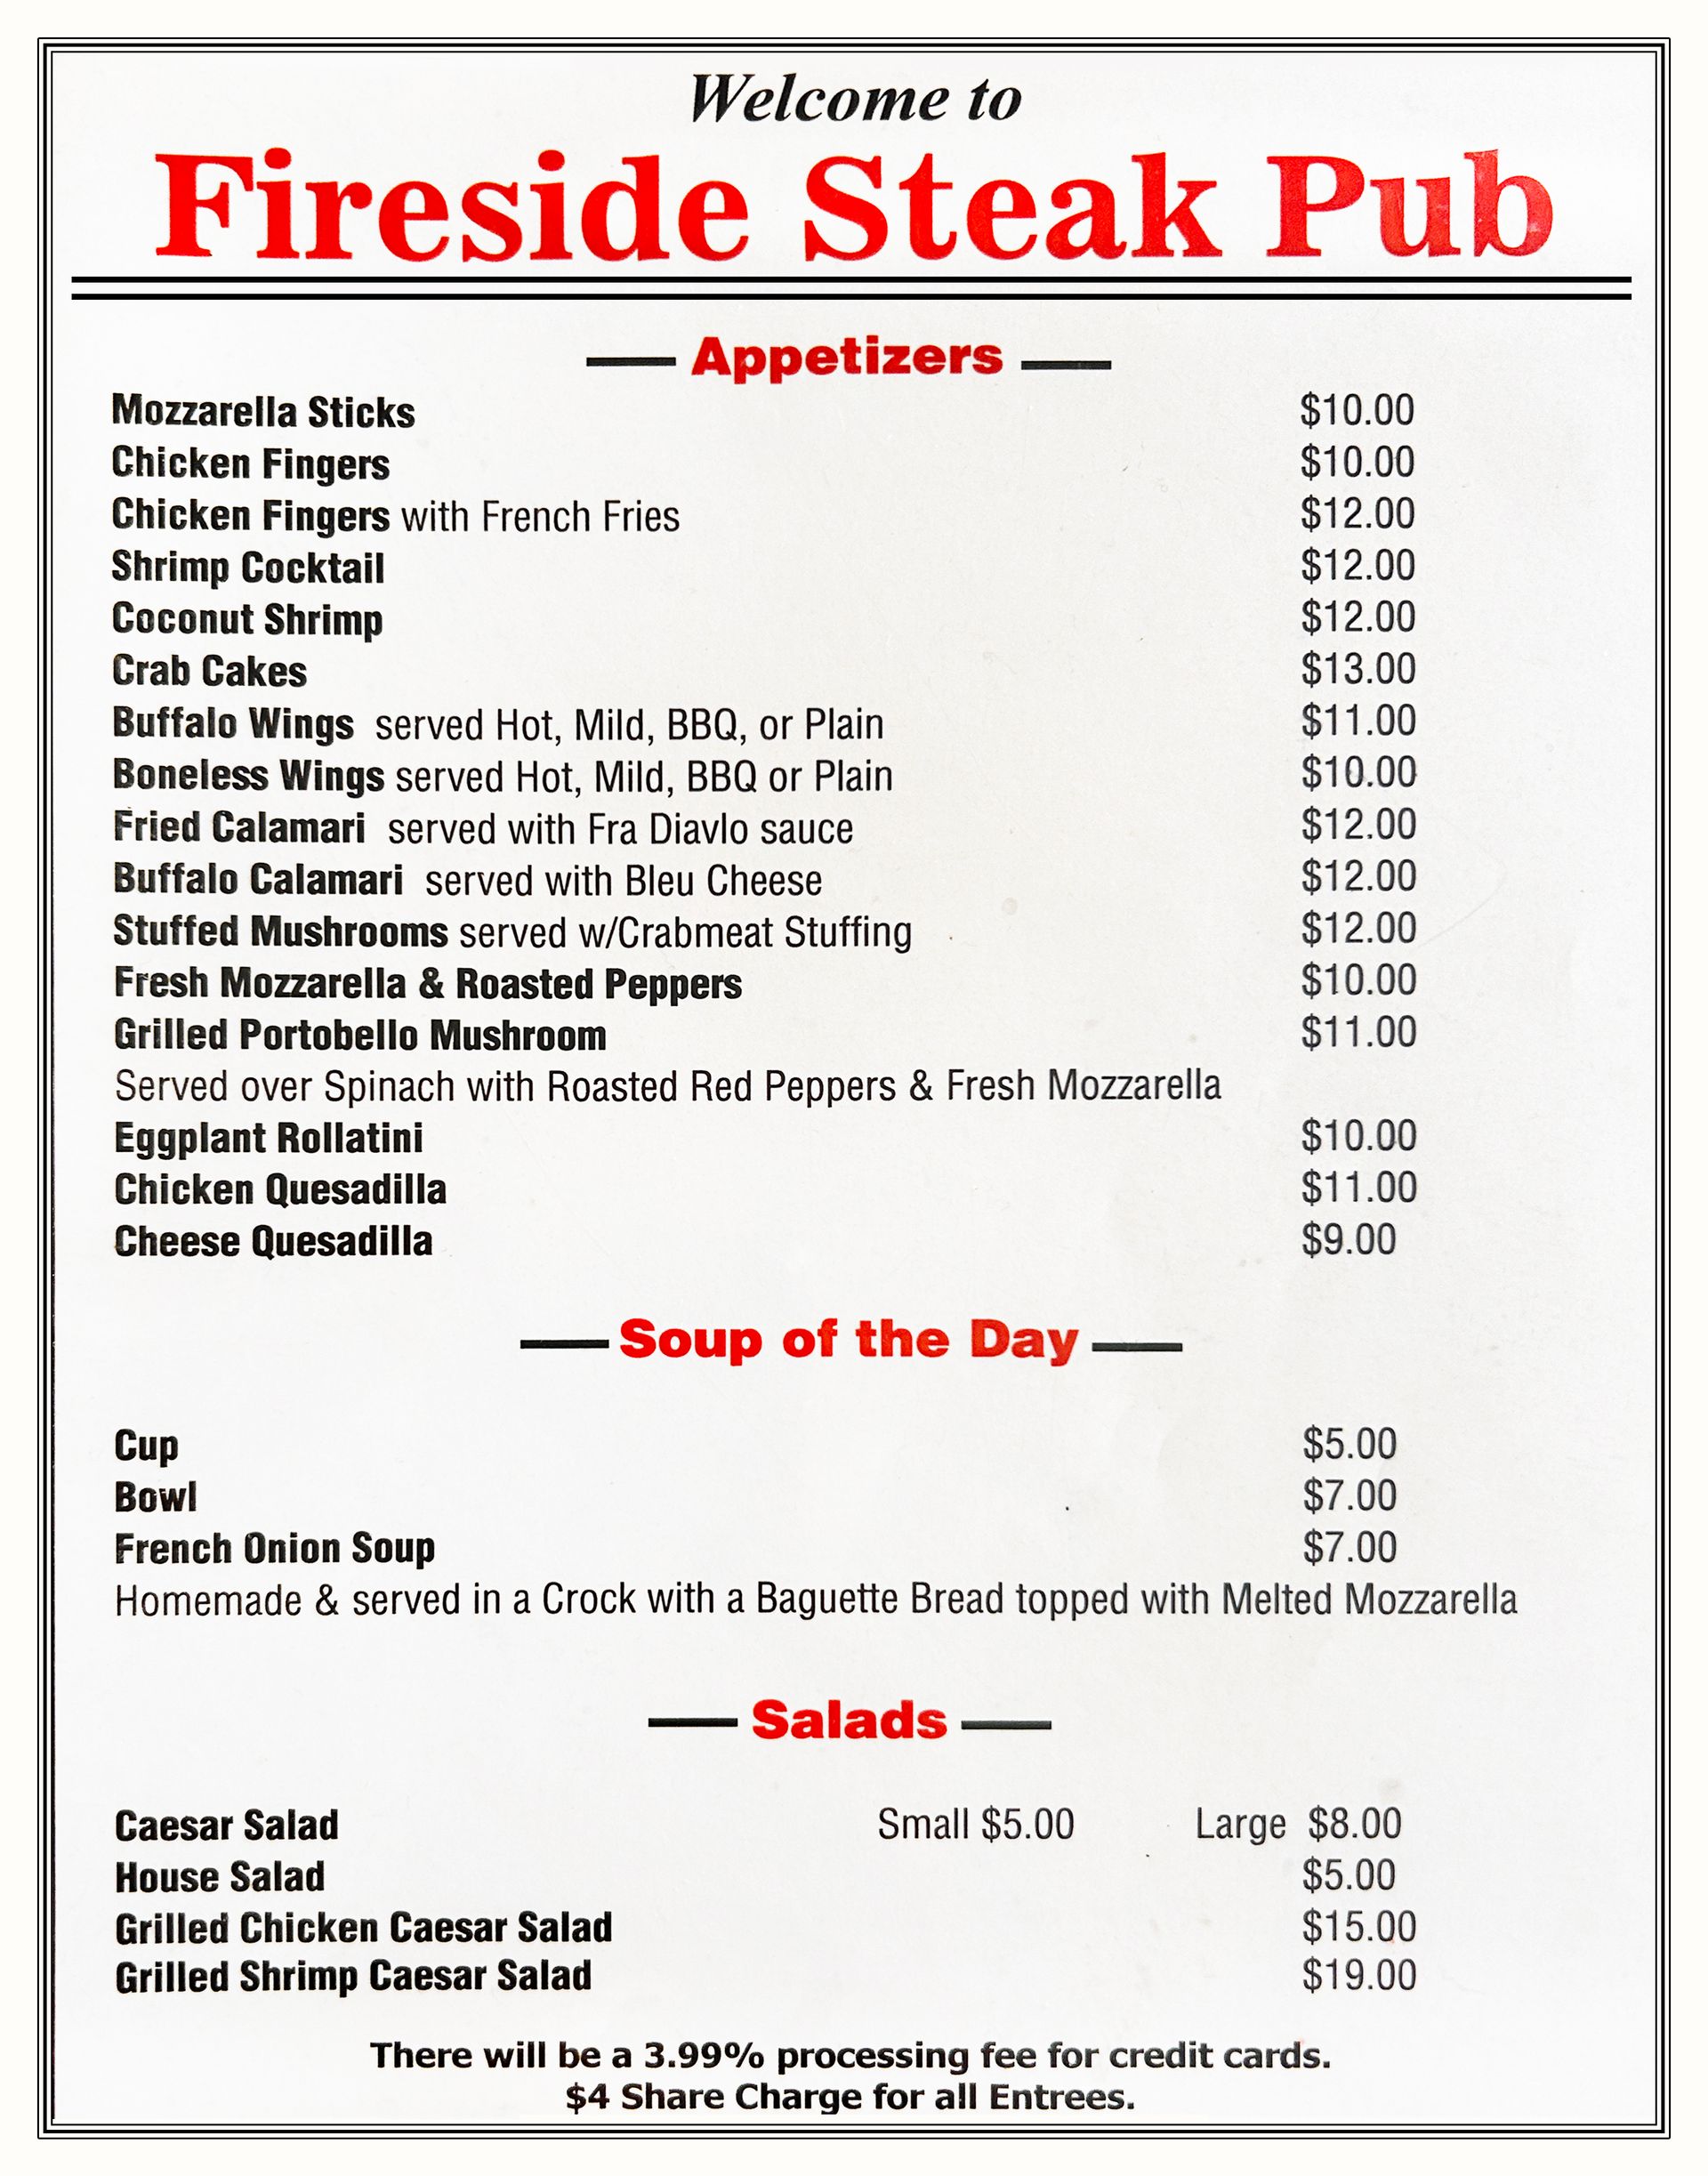 Appetizers, Soup of the Day, and Salads menu